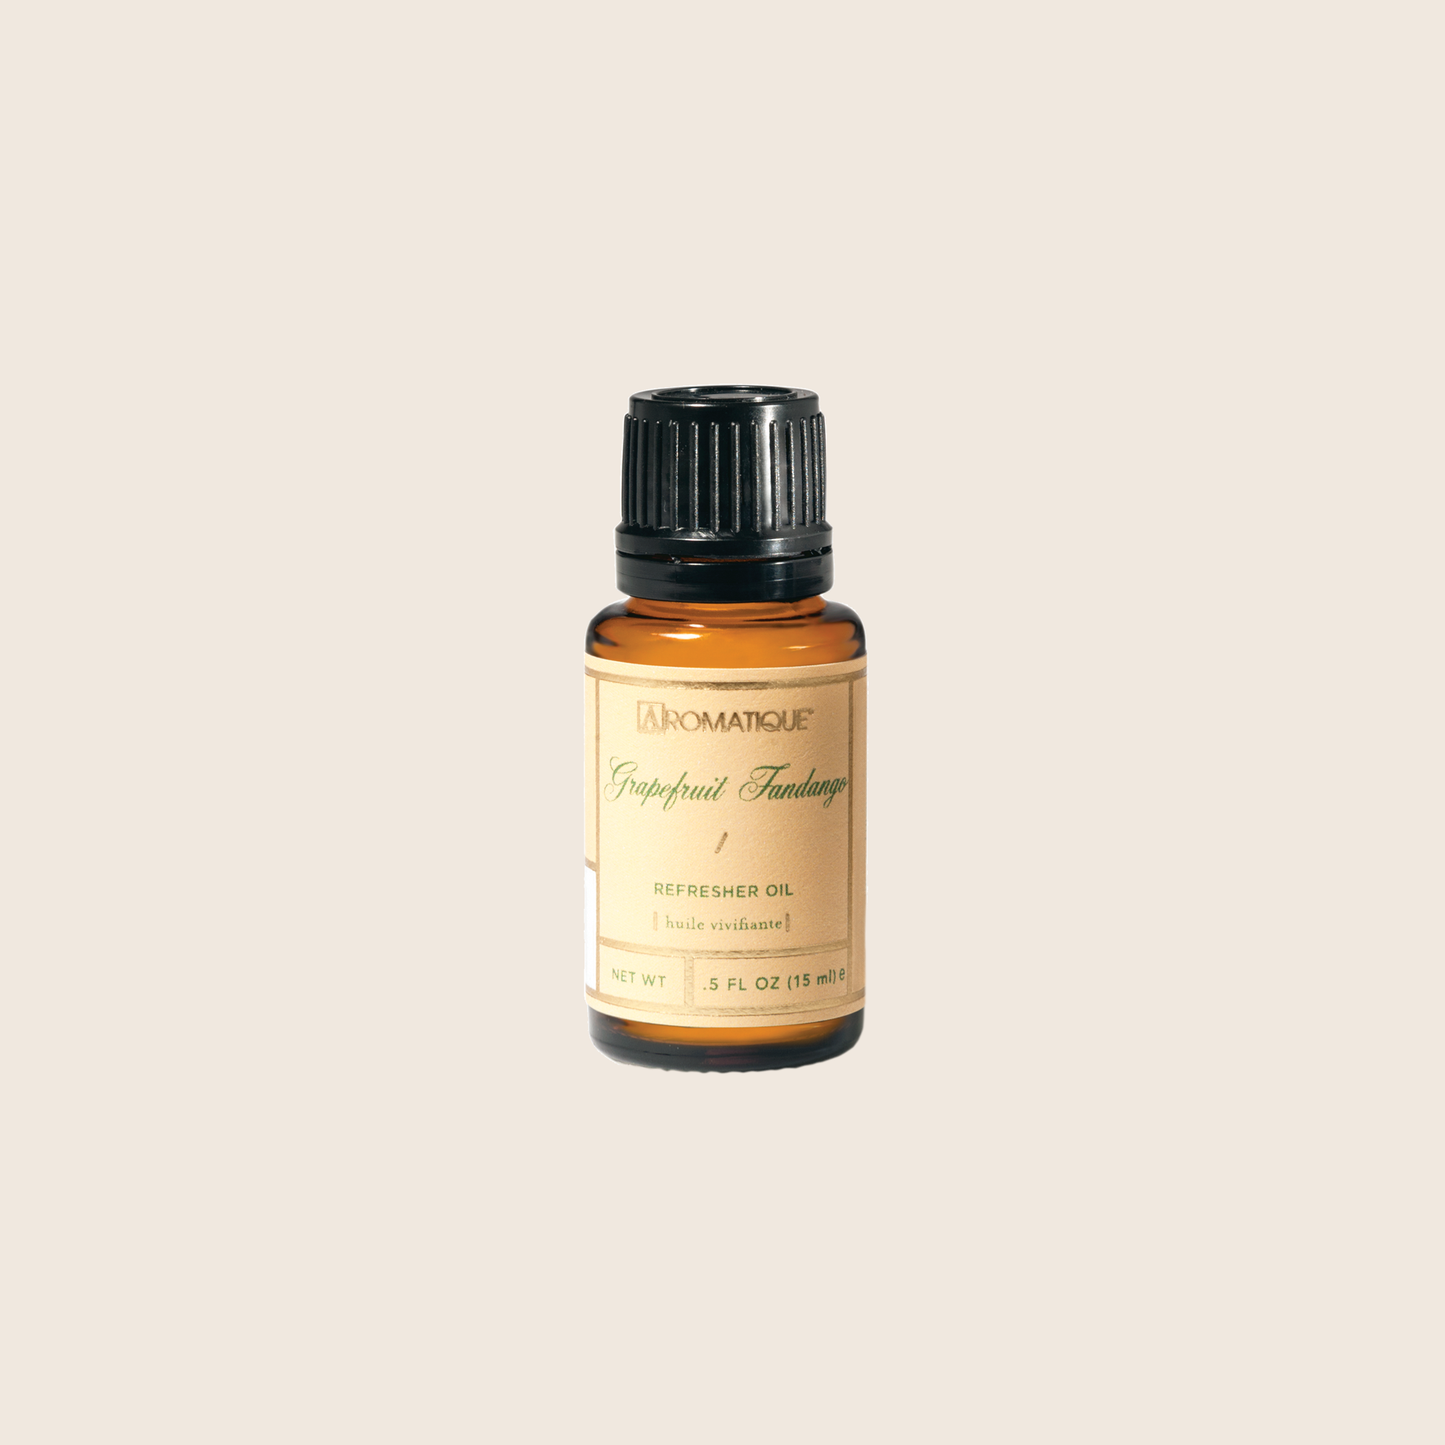 Grapefruit Fandango Refresher Oil is designed to refresh your Decorative Fragrance year-round. The highly concentrated oil quickly absorbs into the wood chips and fills any space with an invigorating fragrance of tangy citrus notes blended with cassis and peach, accented with rose and musk. 